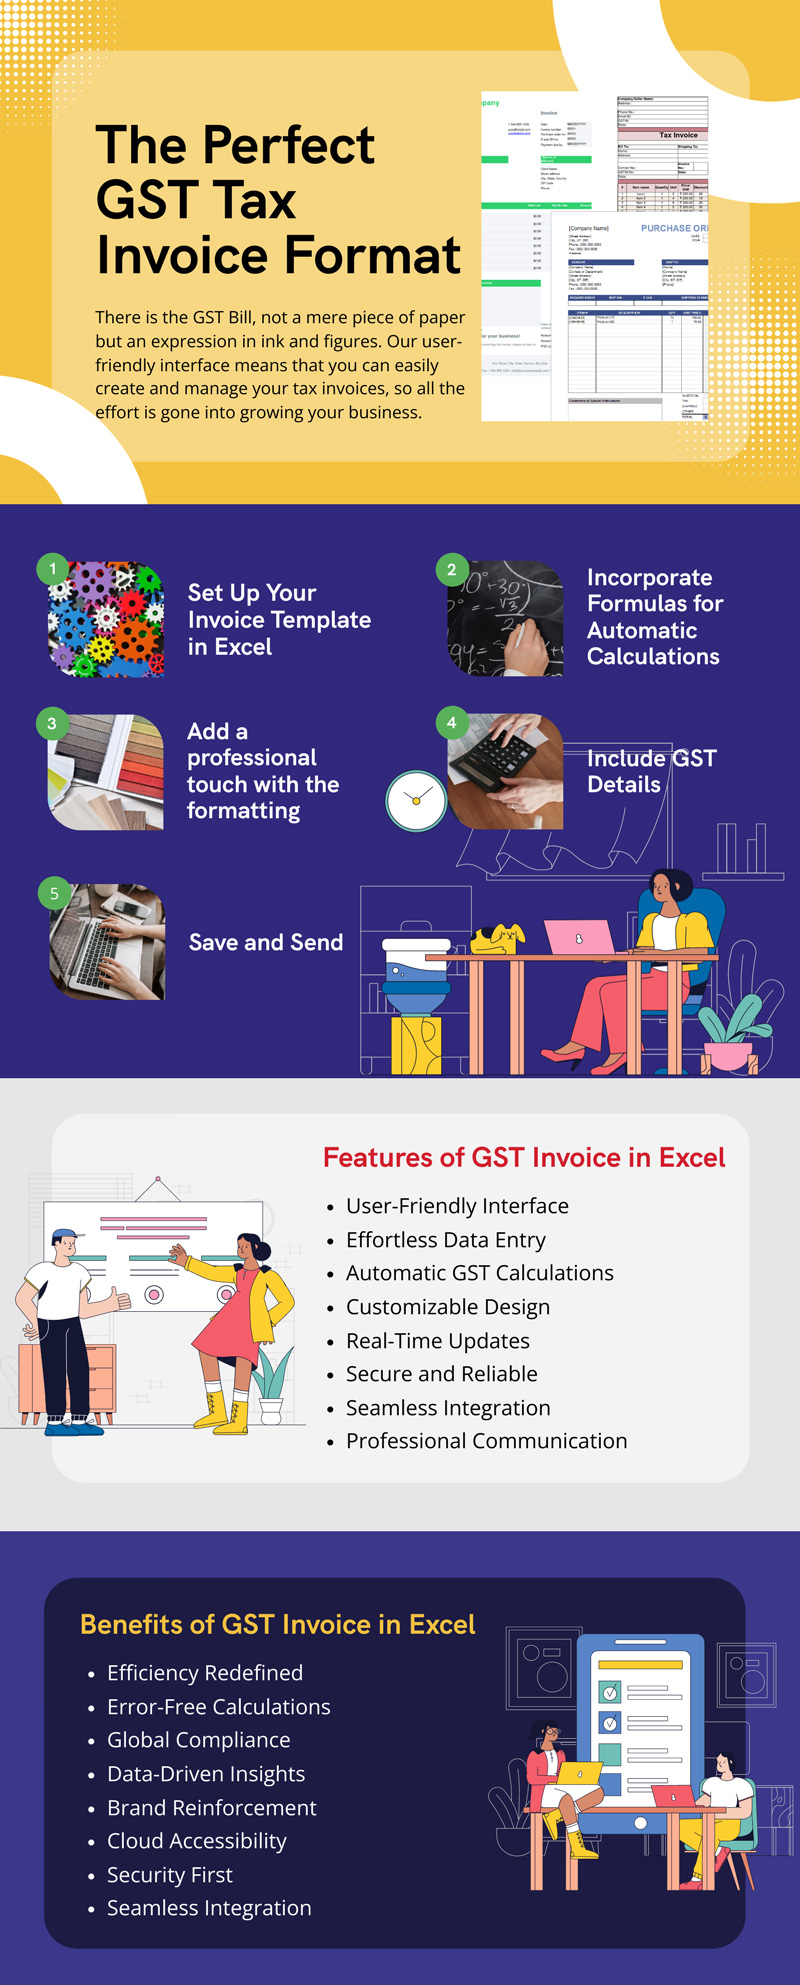 GST Invoice in Excel